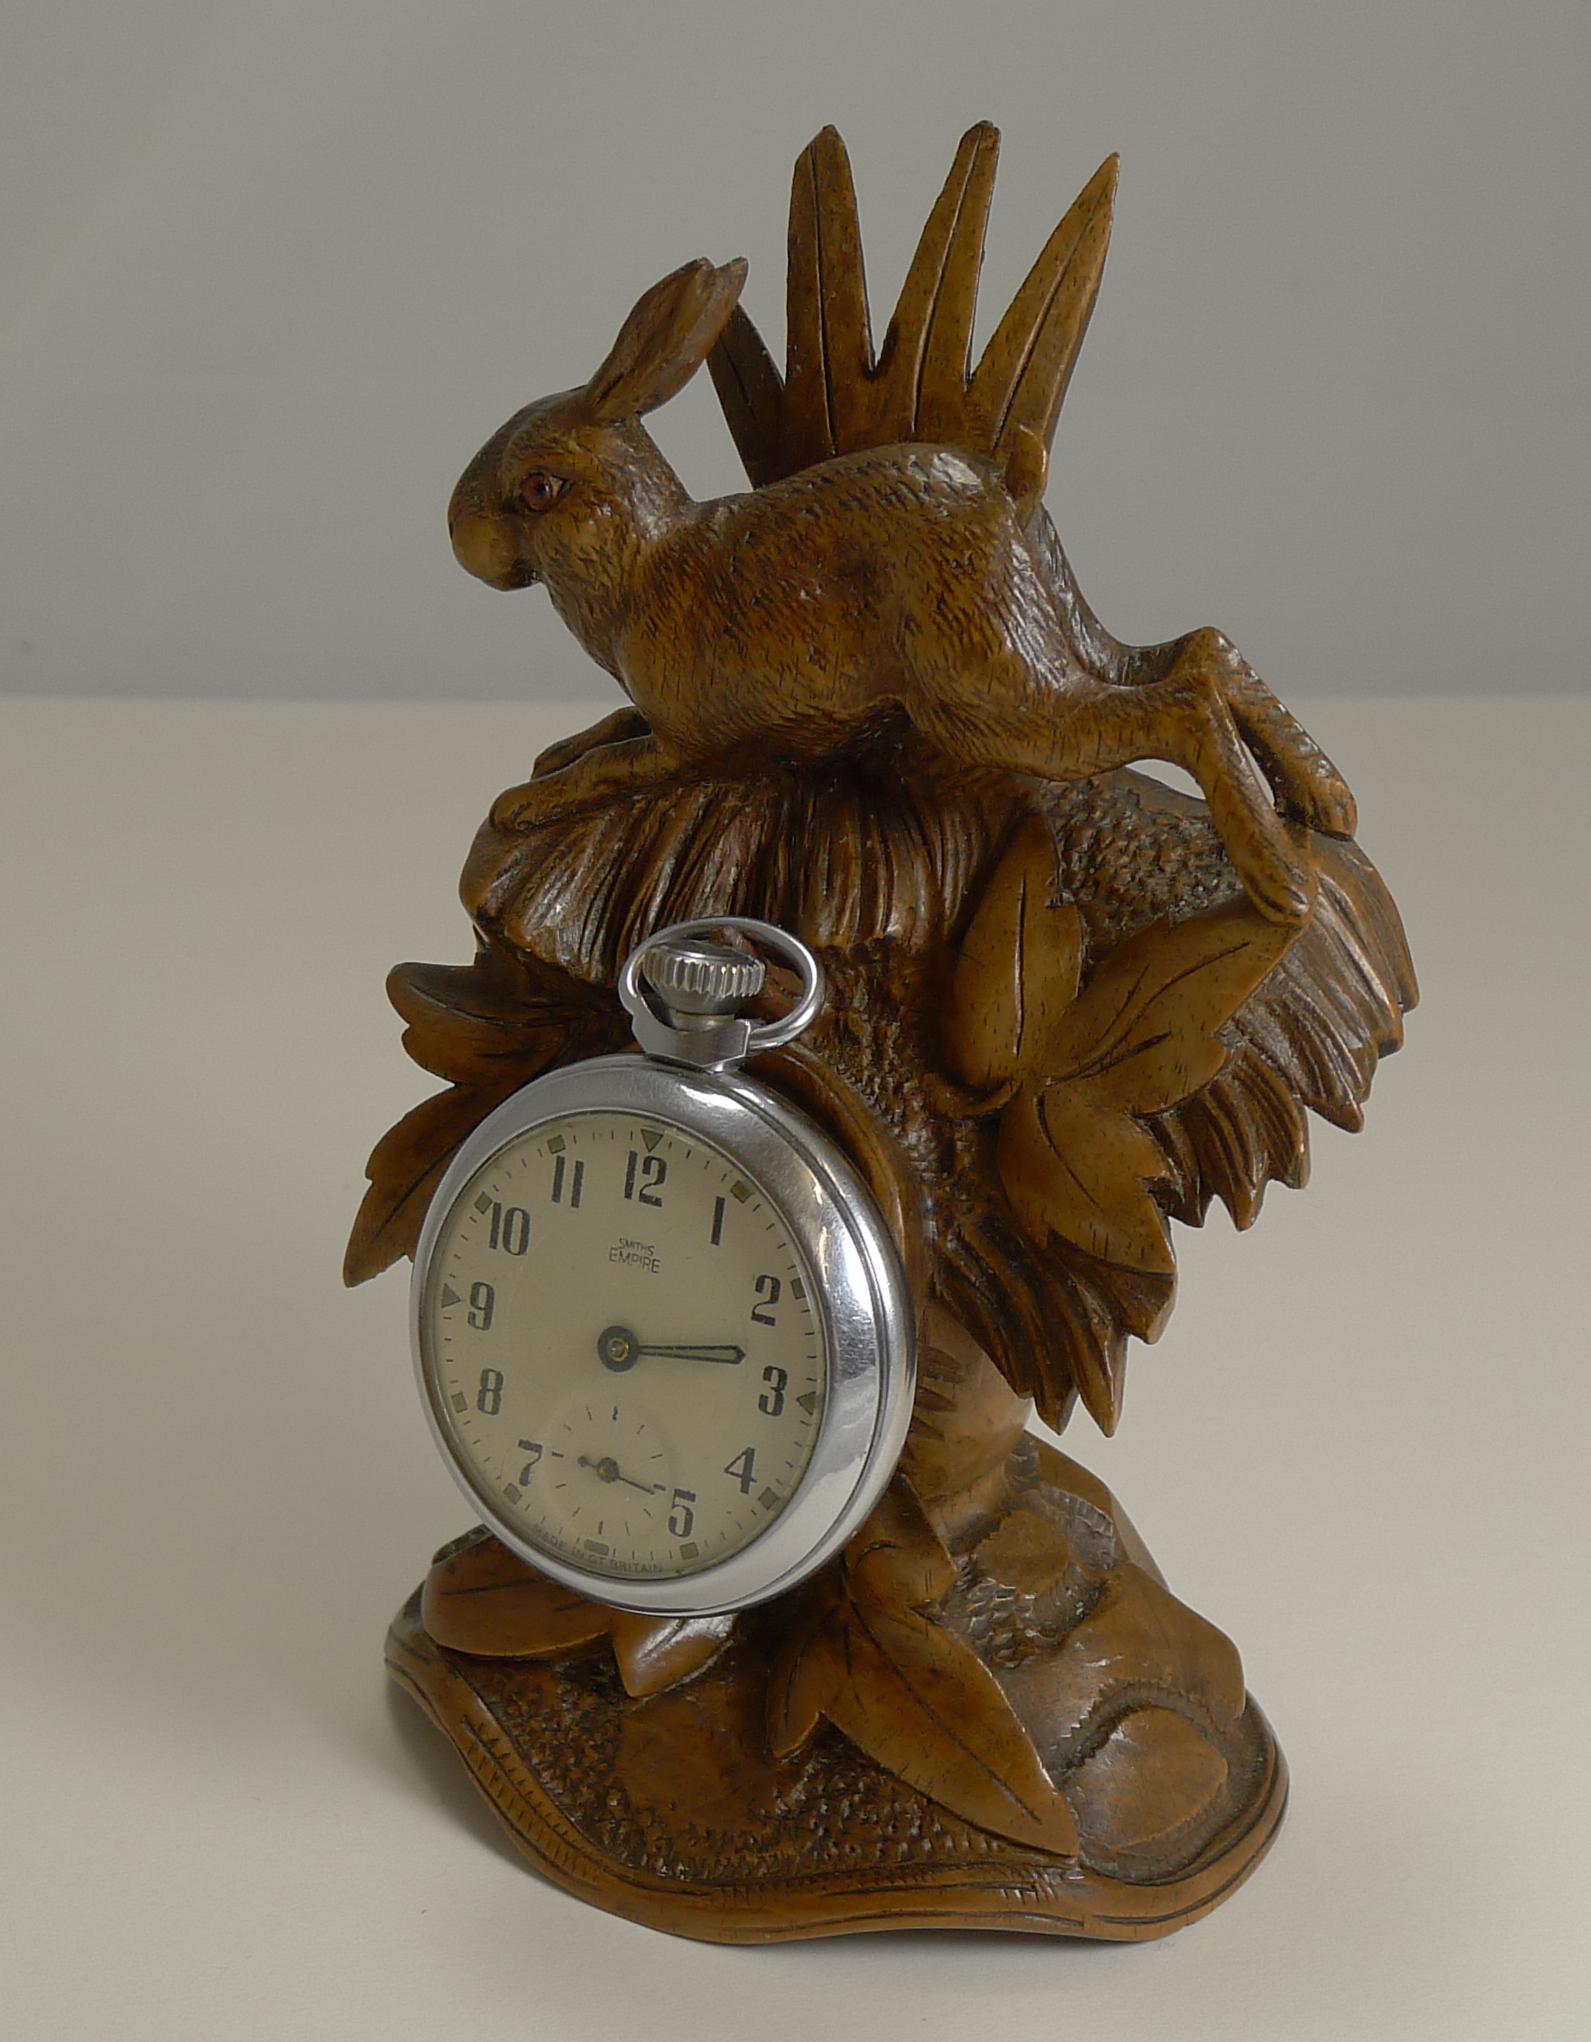 A wonderful figural pocket watch stand (pocket watch not included) from Black Forest region, hand-carved circa 1890-1900 from Linden wood.

Of course what makes this highly collectible is the carved Hare to the top, retaining it's two original